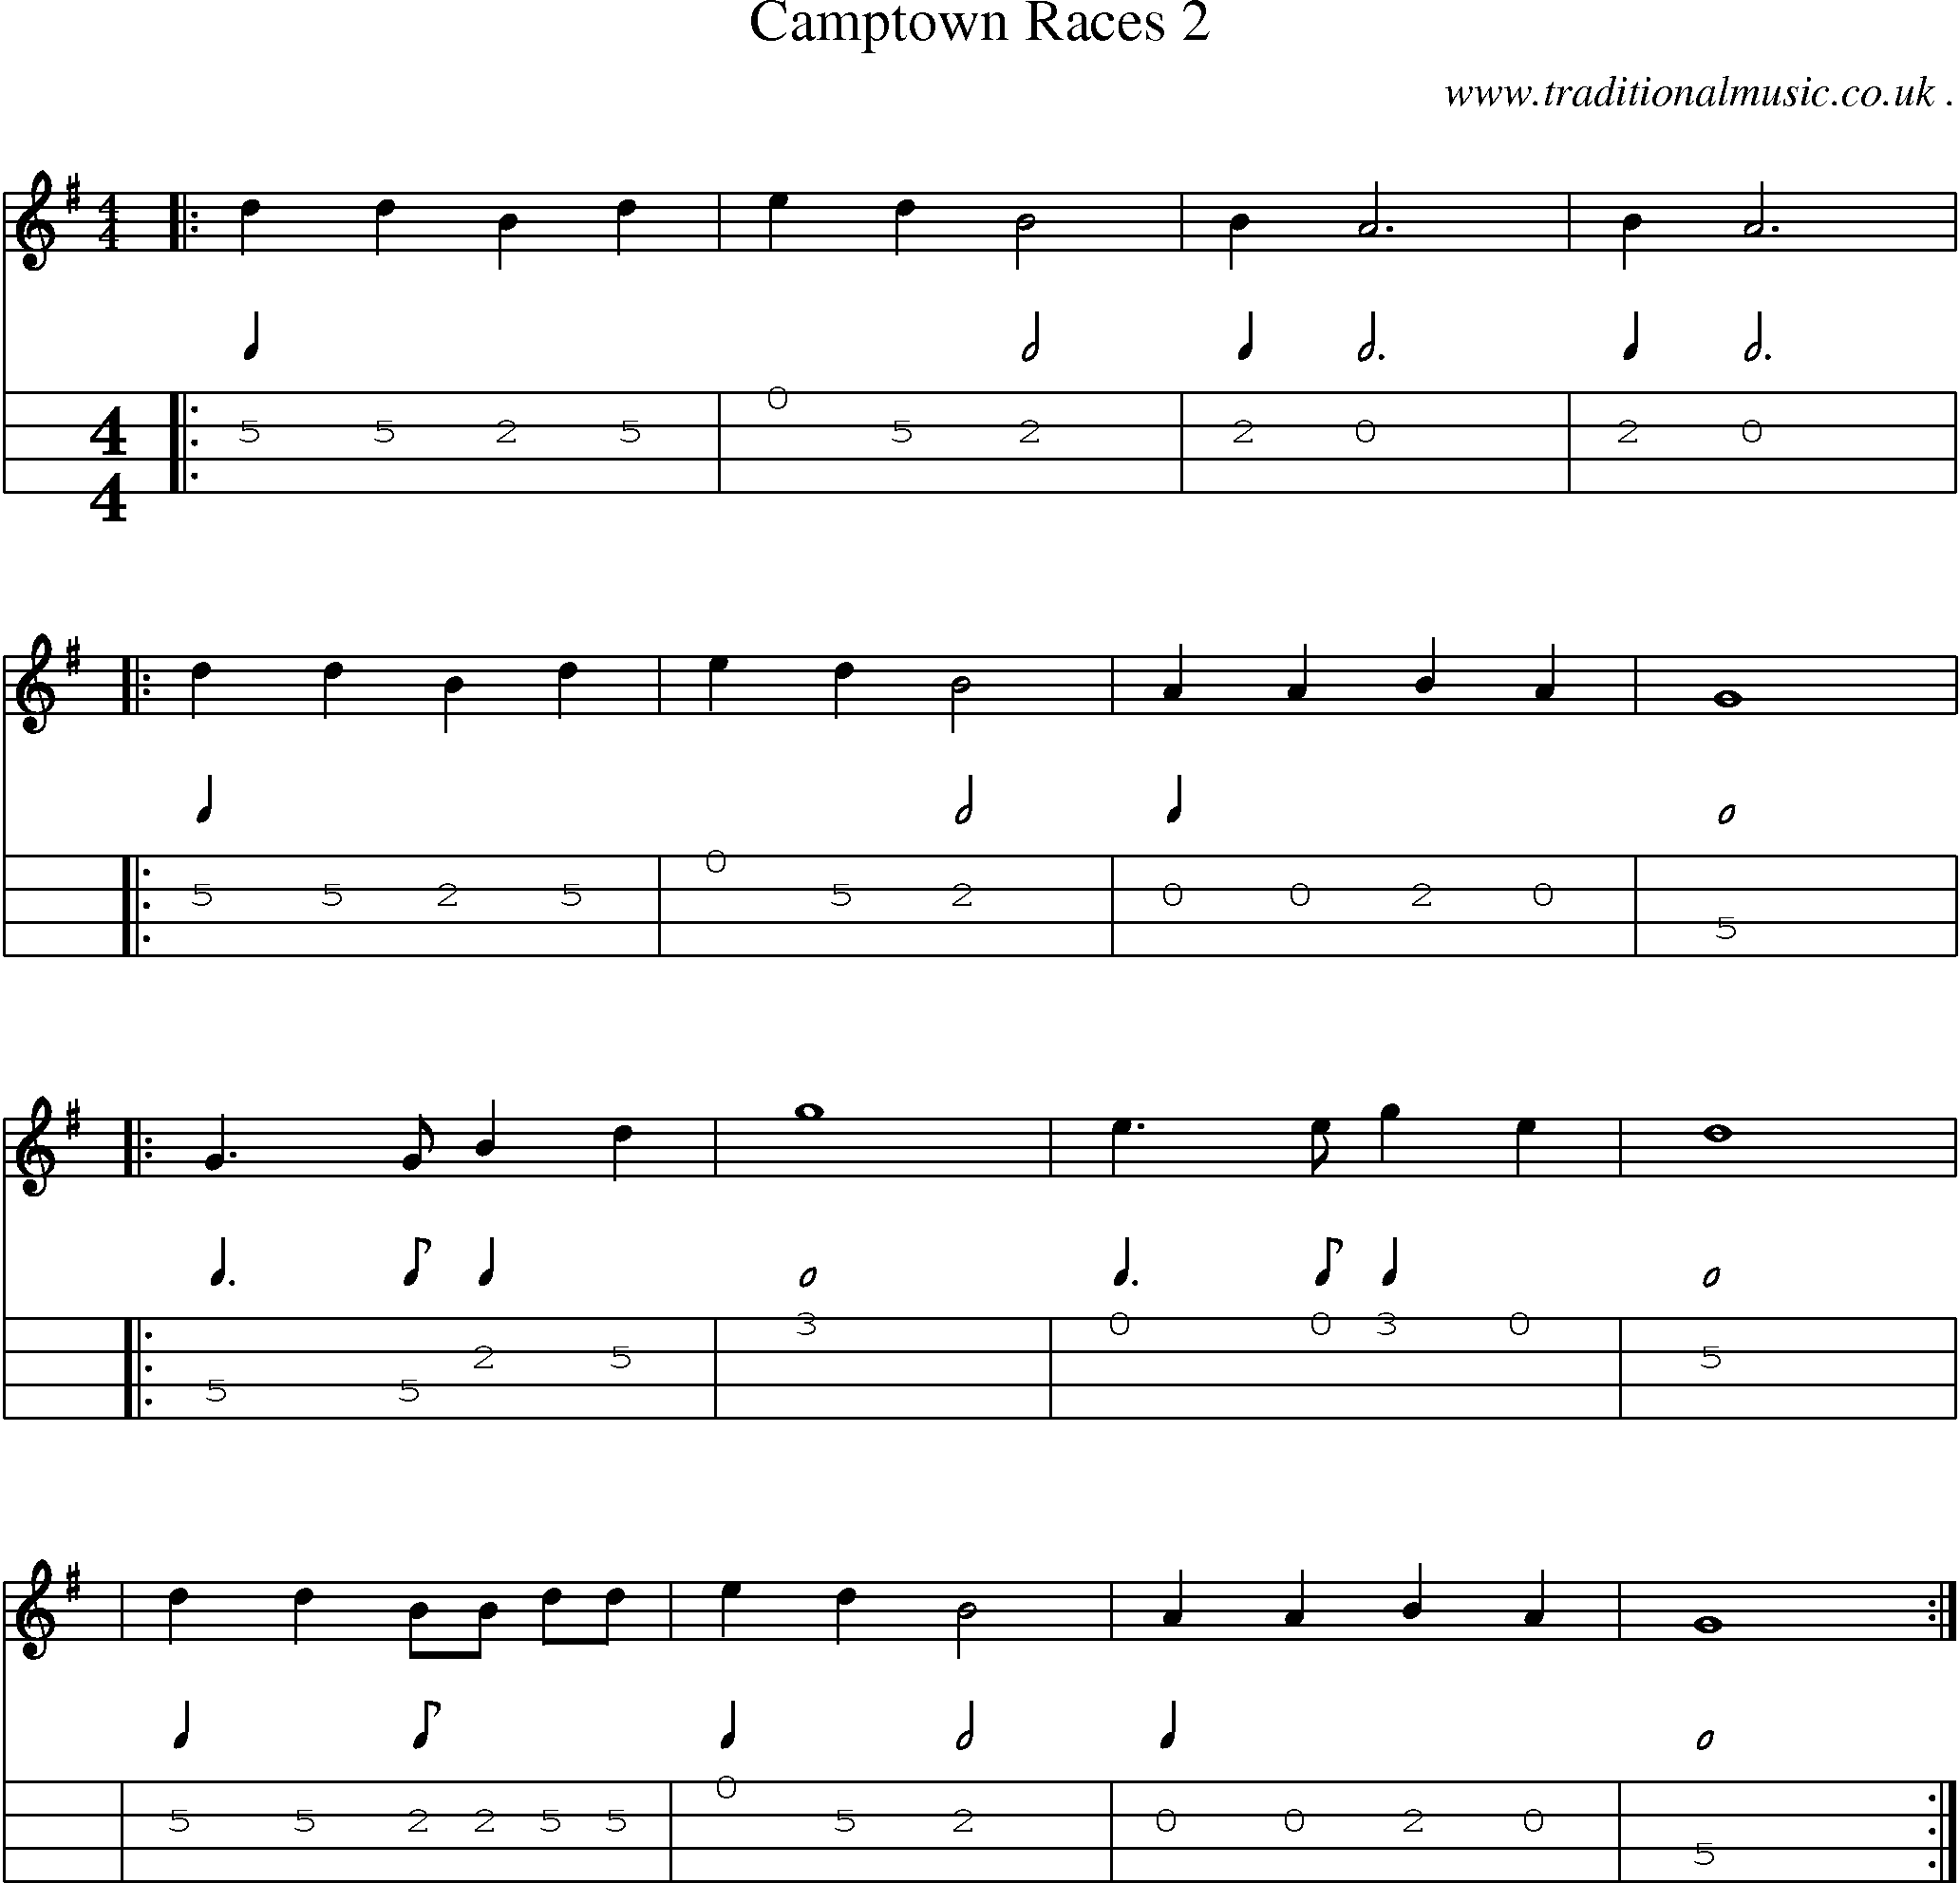 Music Score and Mandolin Tabs for Camptown Races 2